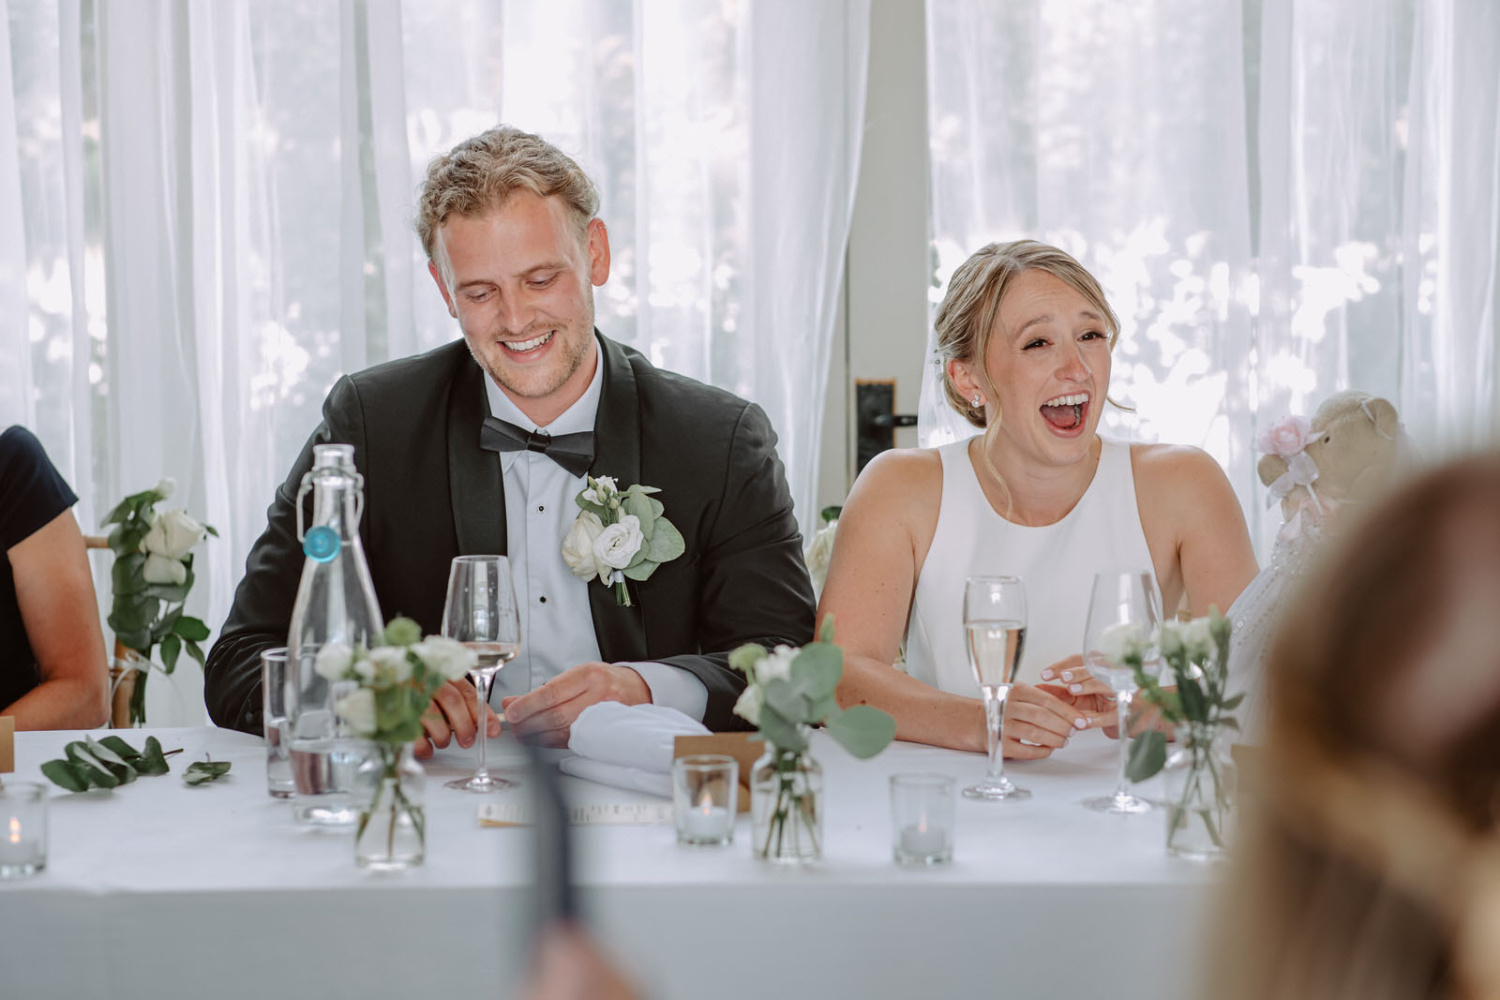 A group of people laughing at a table at a wedding.